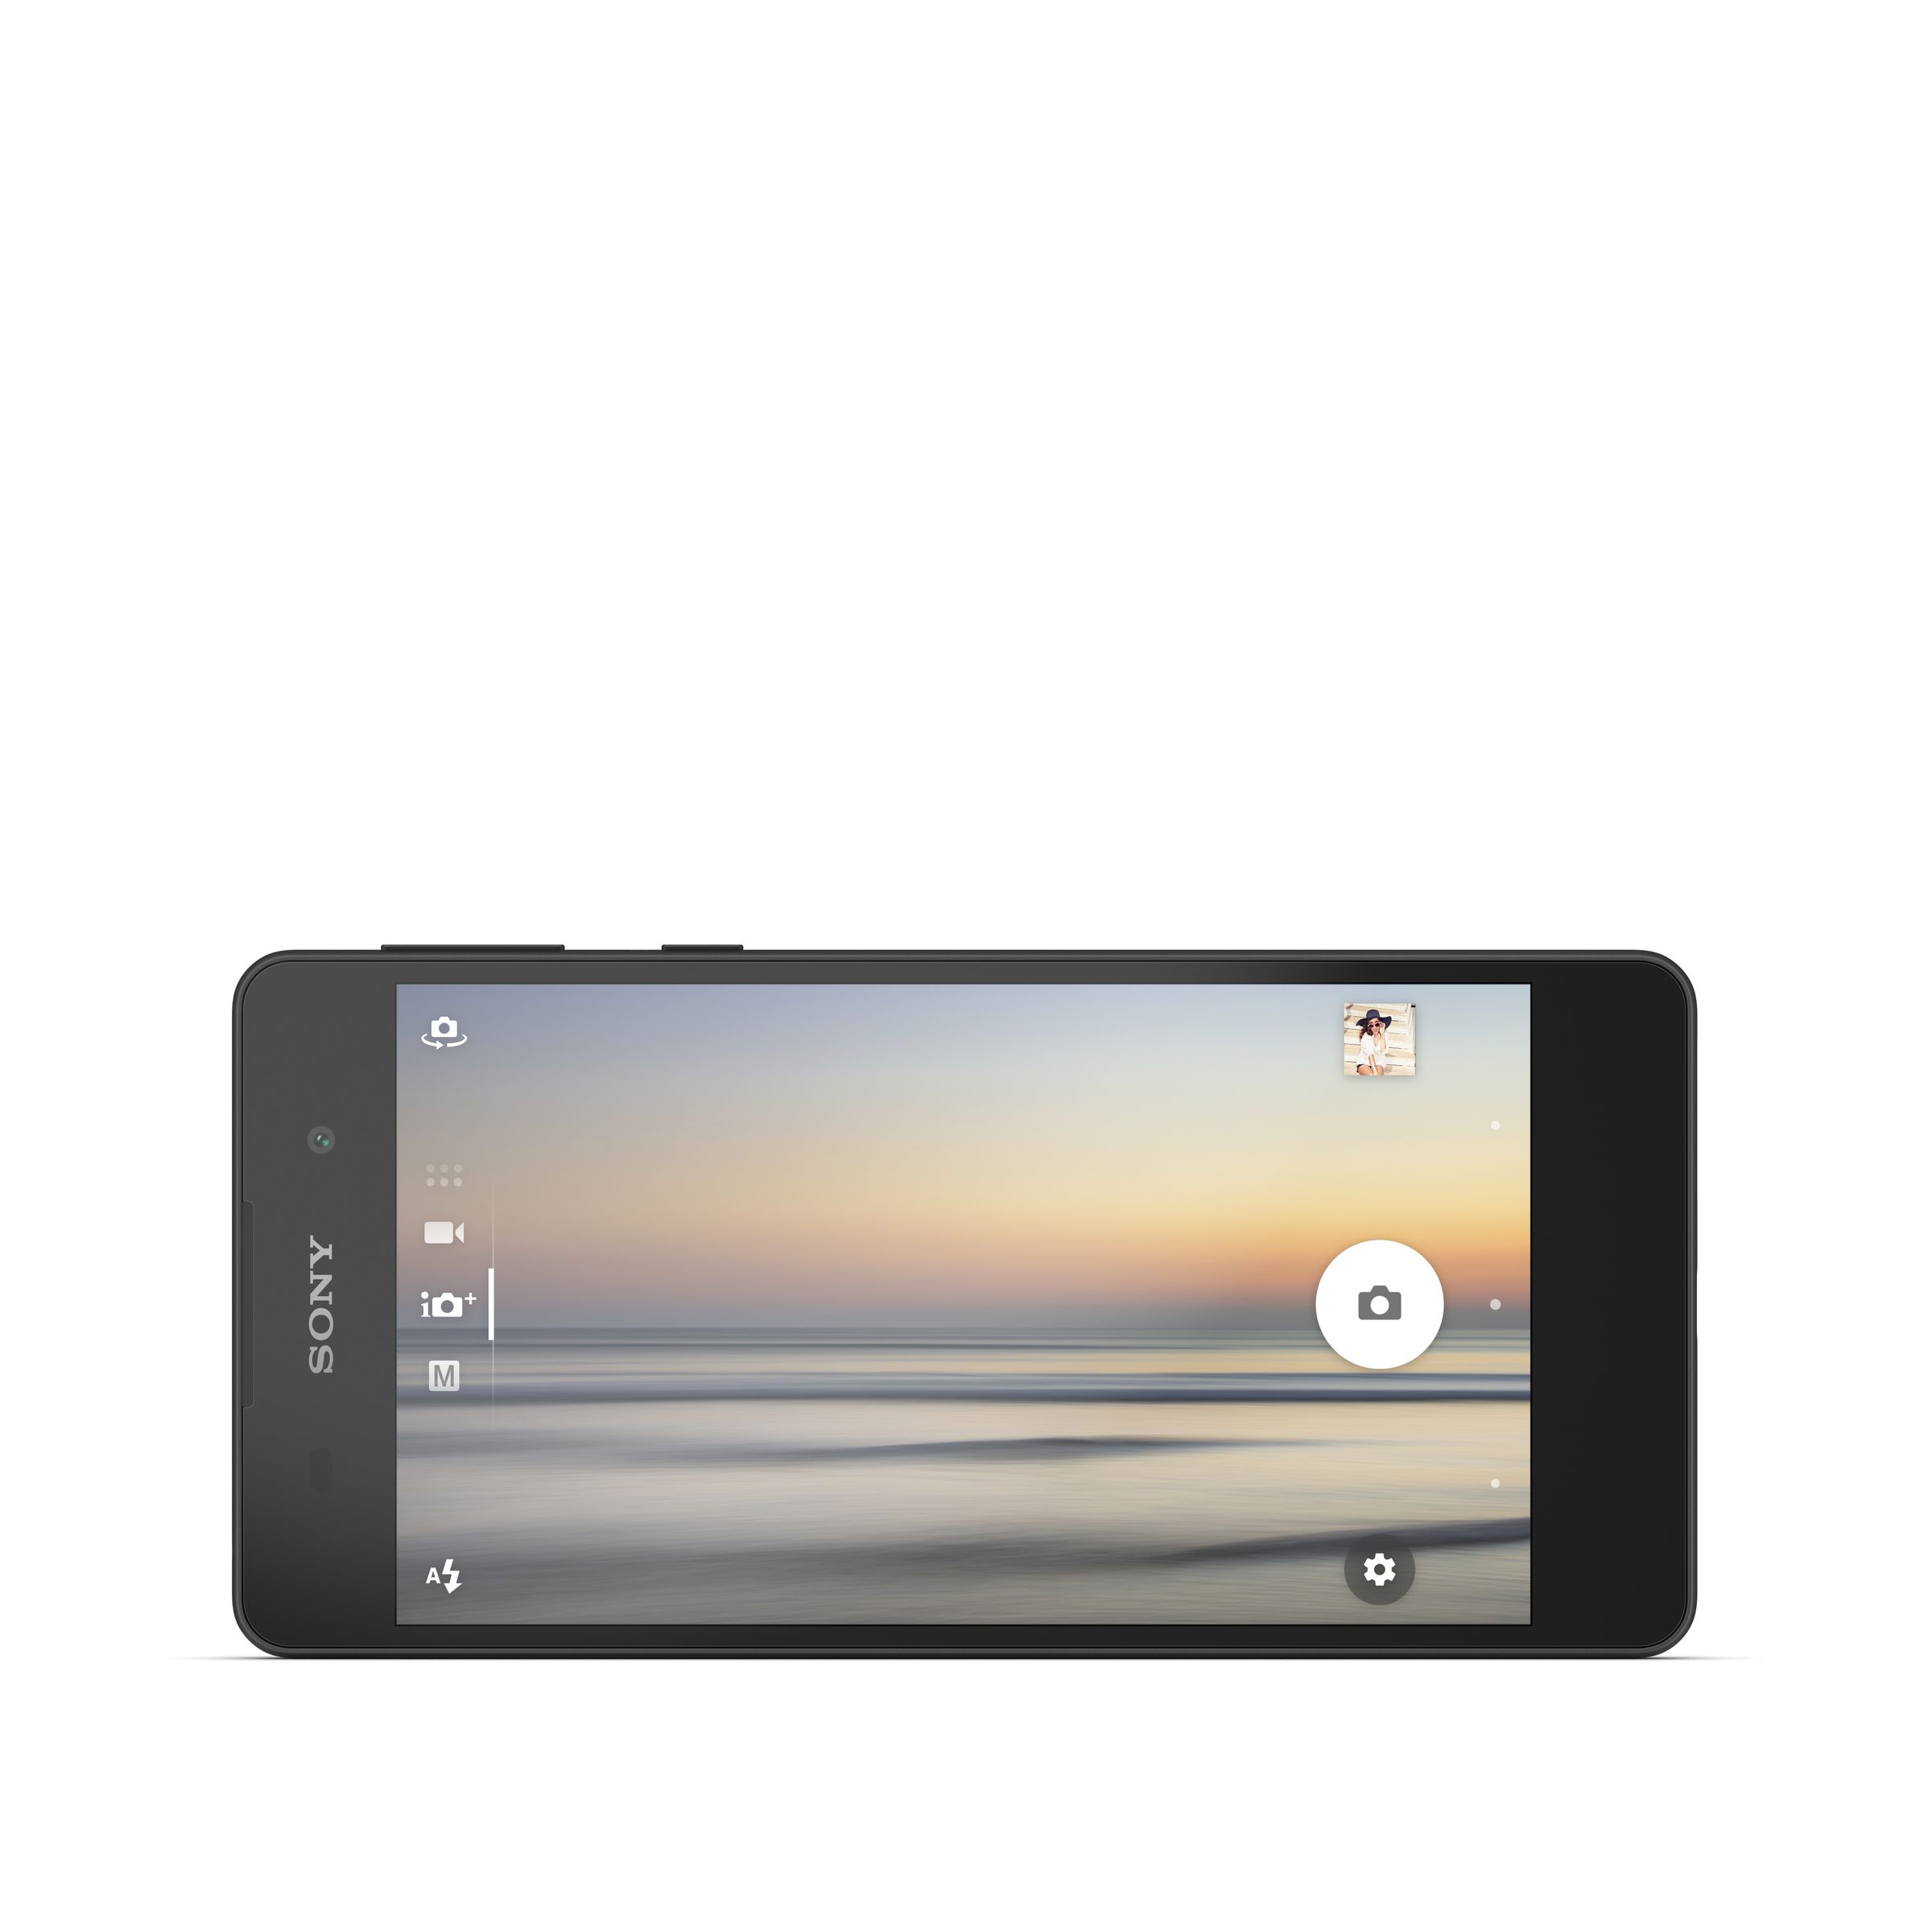 Sony officially unveiled its Xperia E5